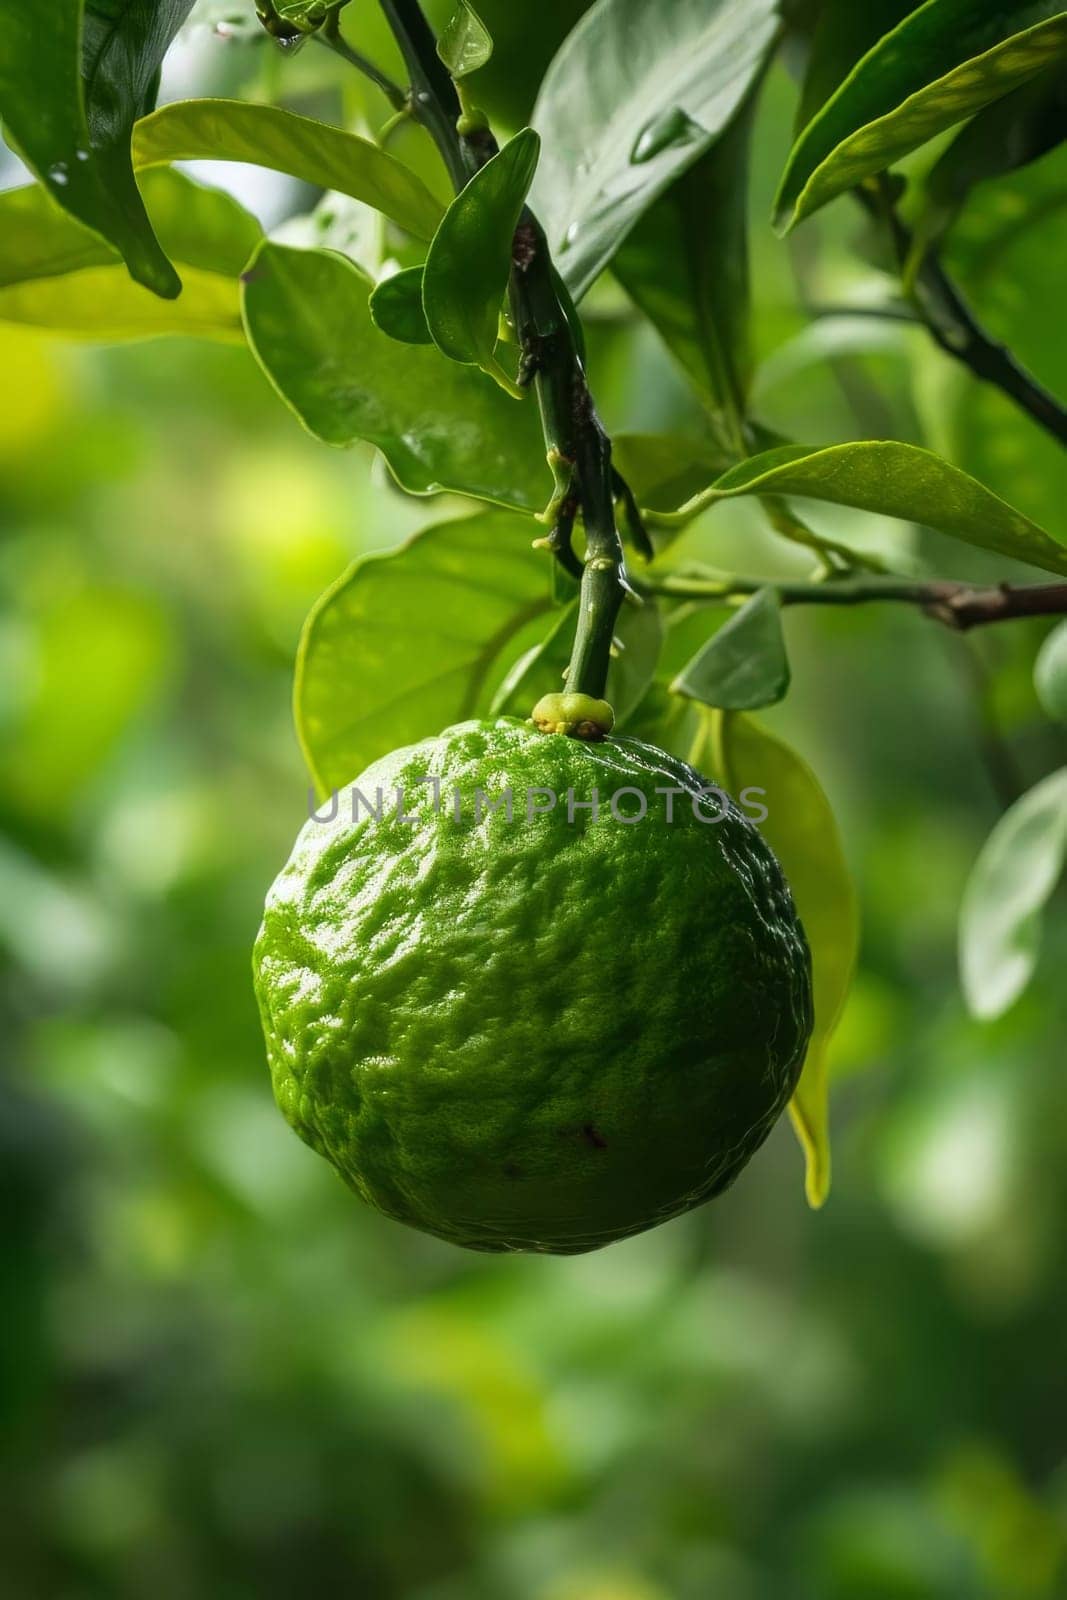 Bergamot weighs on a branch in the garden. Selective focus. Food.